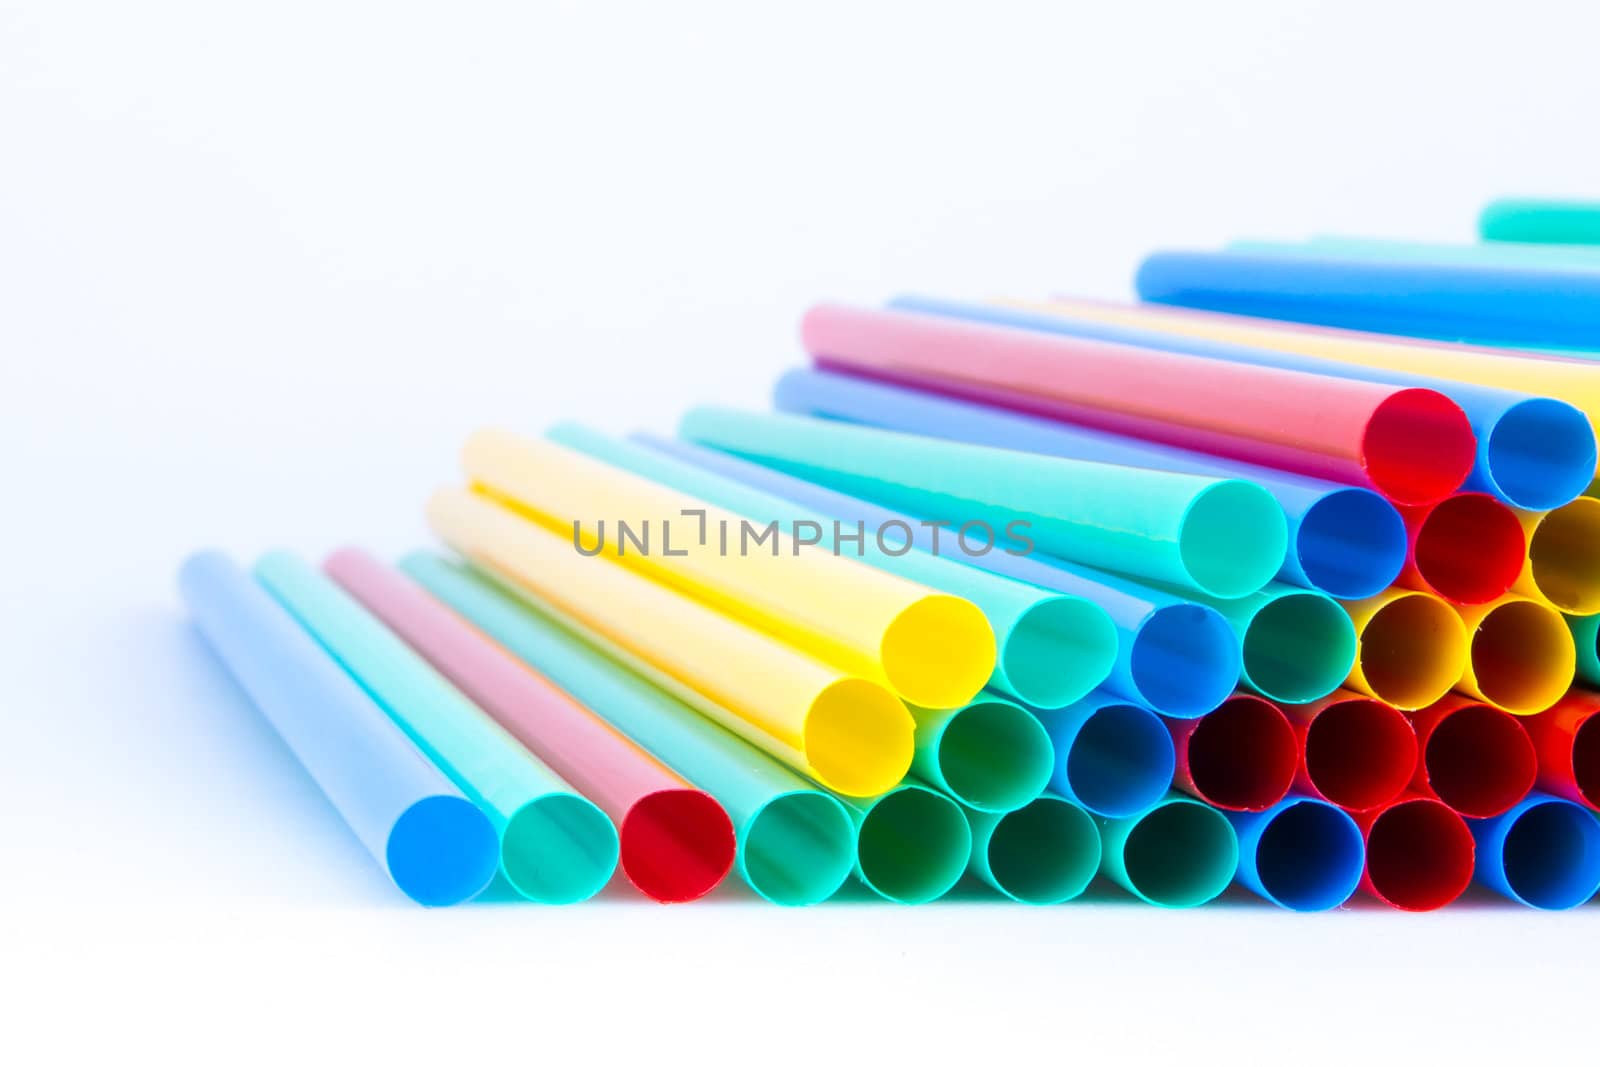 Different colors of straws (green, blue, yellow, red)